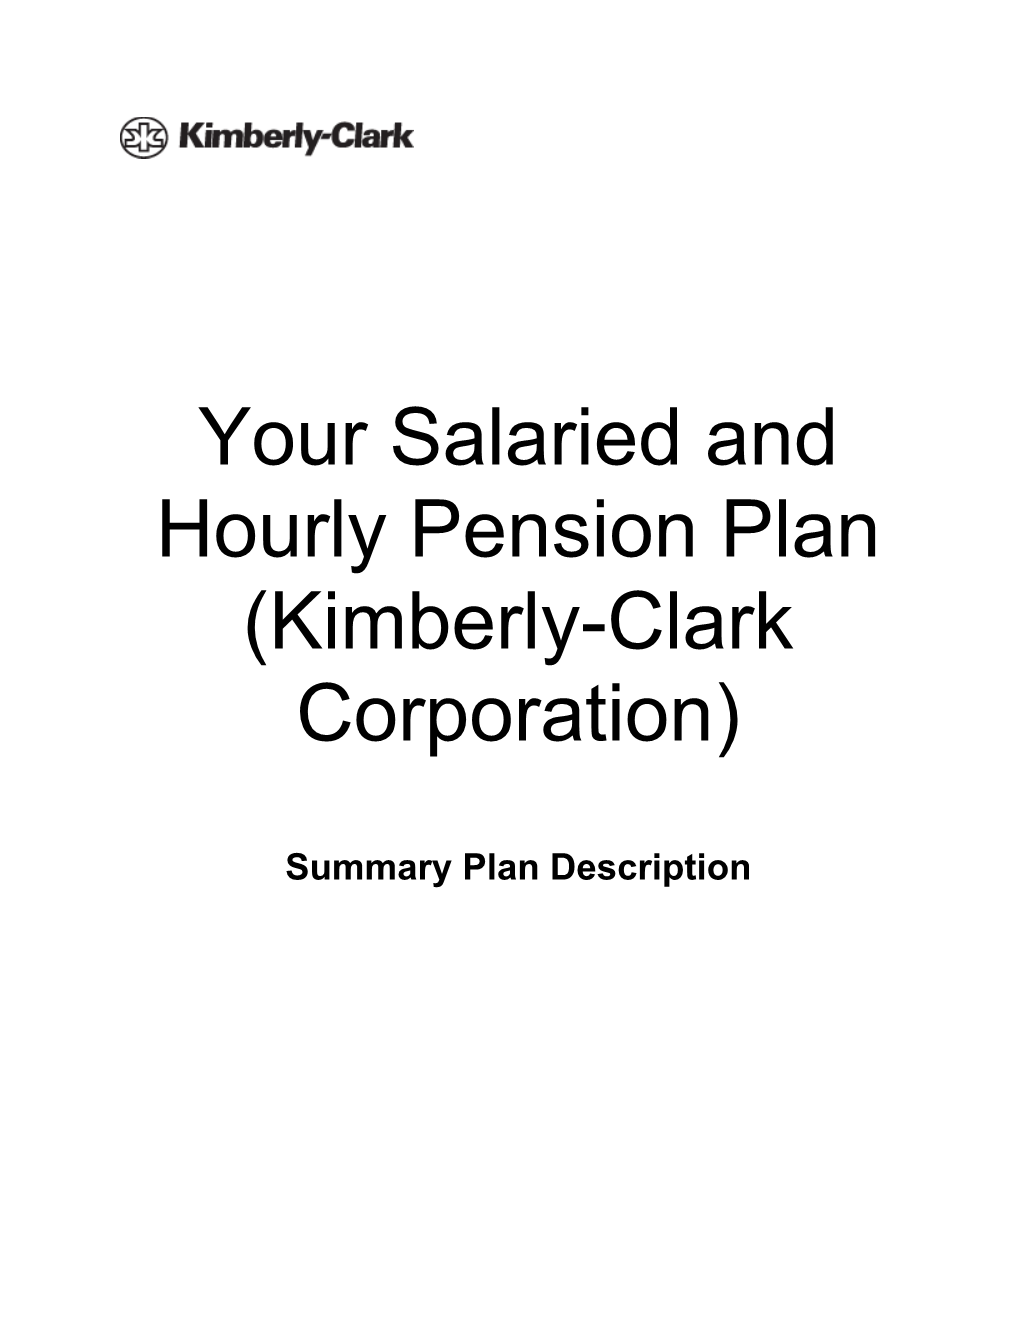 Your Salaried and Hourly Pension Plan (Kimberly-Clark Corporation)